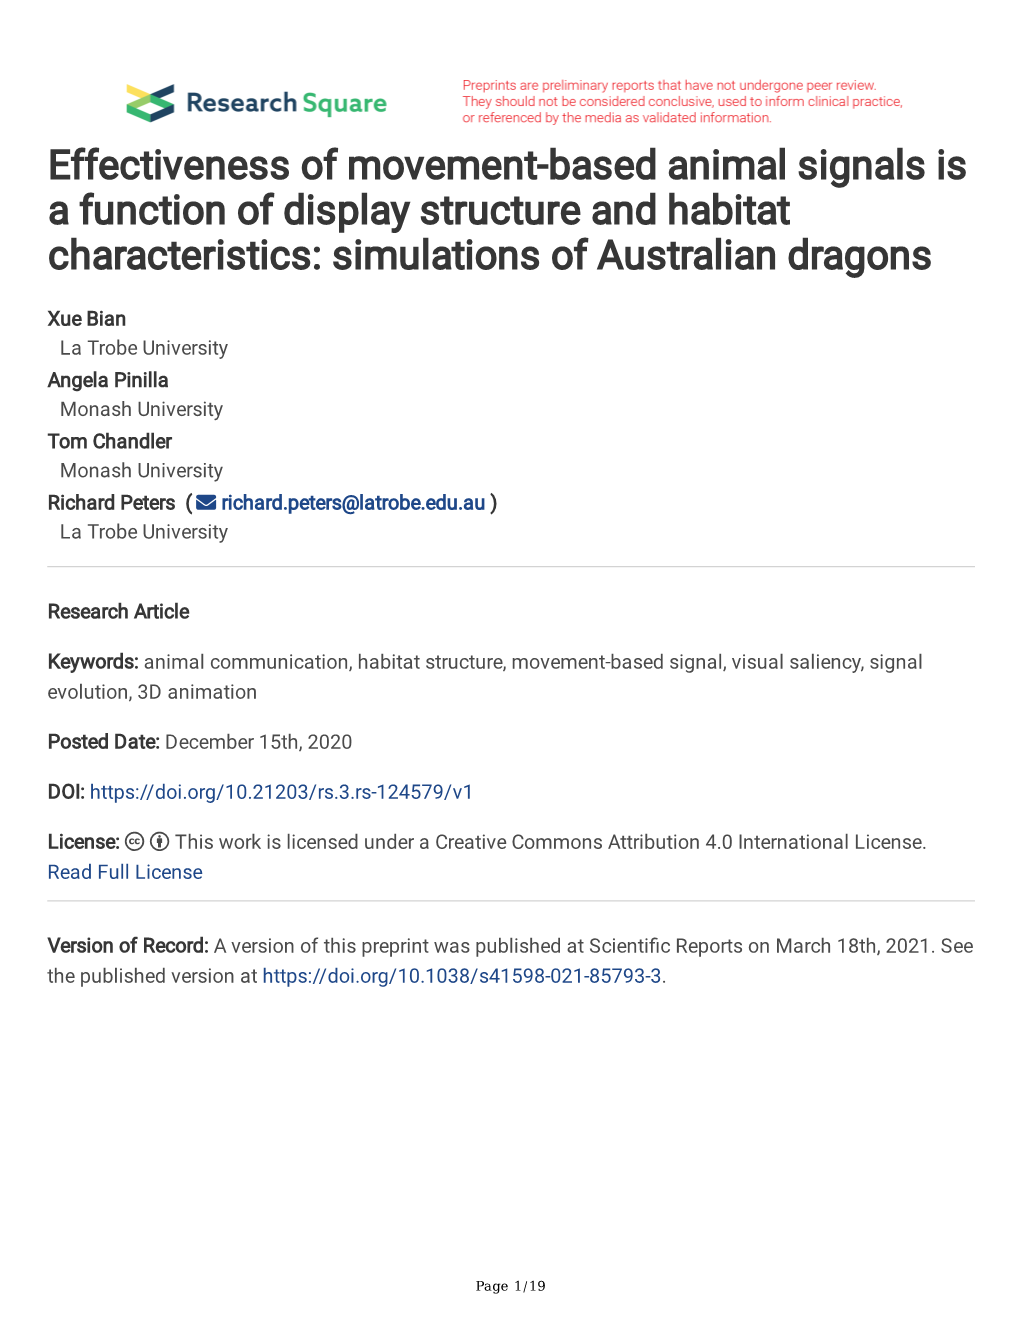 Effectiveness of Movement-Based Animal Signals Is a Function of Display Structure and Habitat Characteristics: Simulations of Australian Dragons